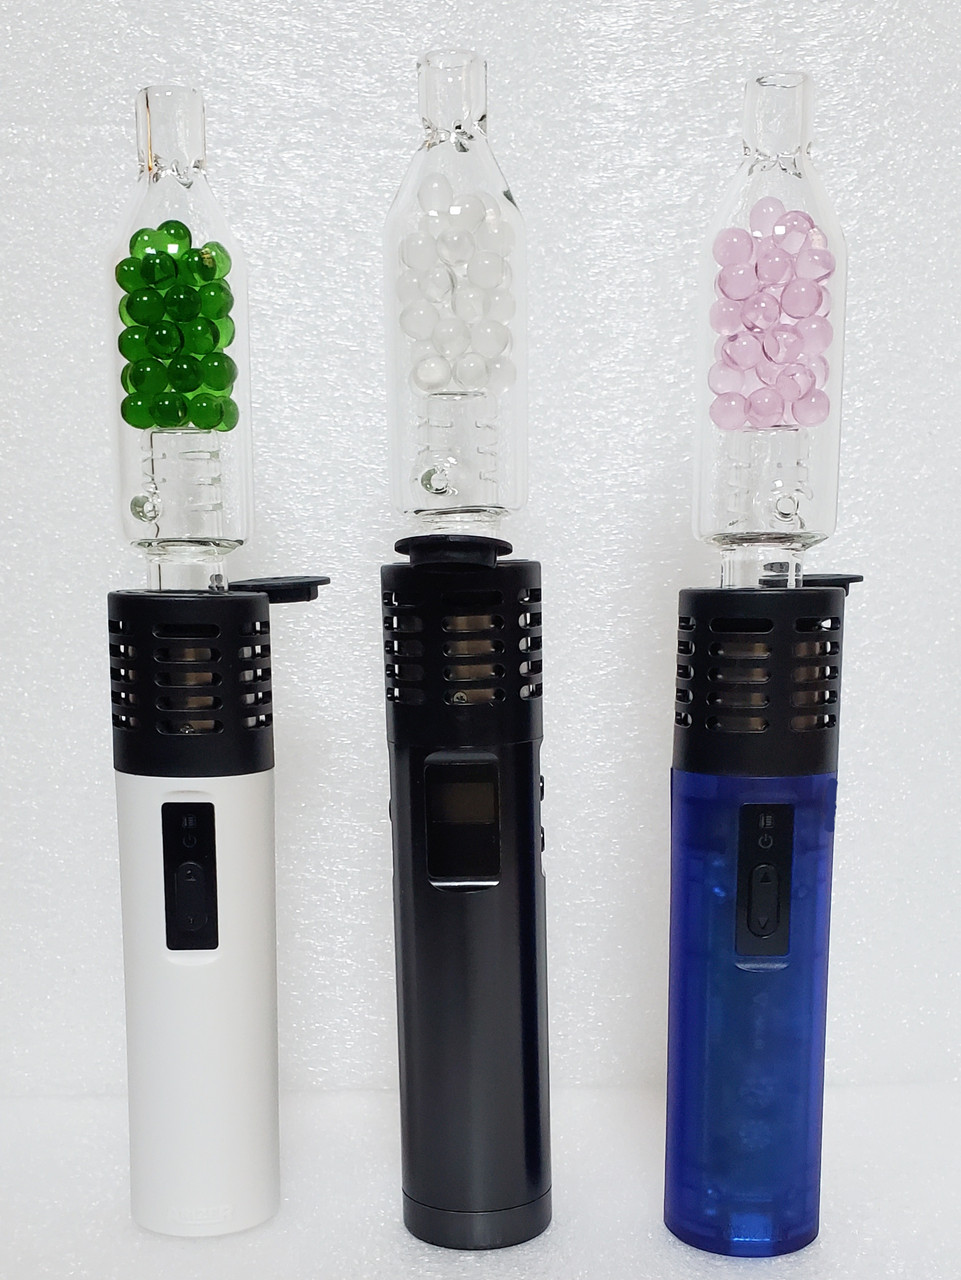 Comparision Between Arizer SOLO 2 and Arizer Air 2 Vaporizer